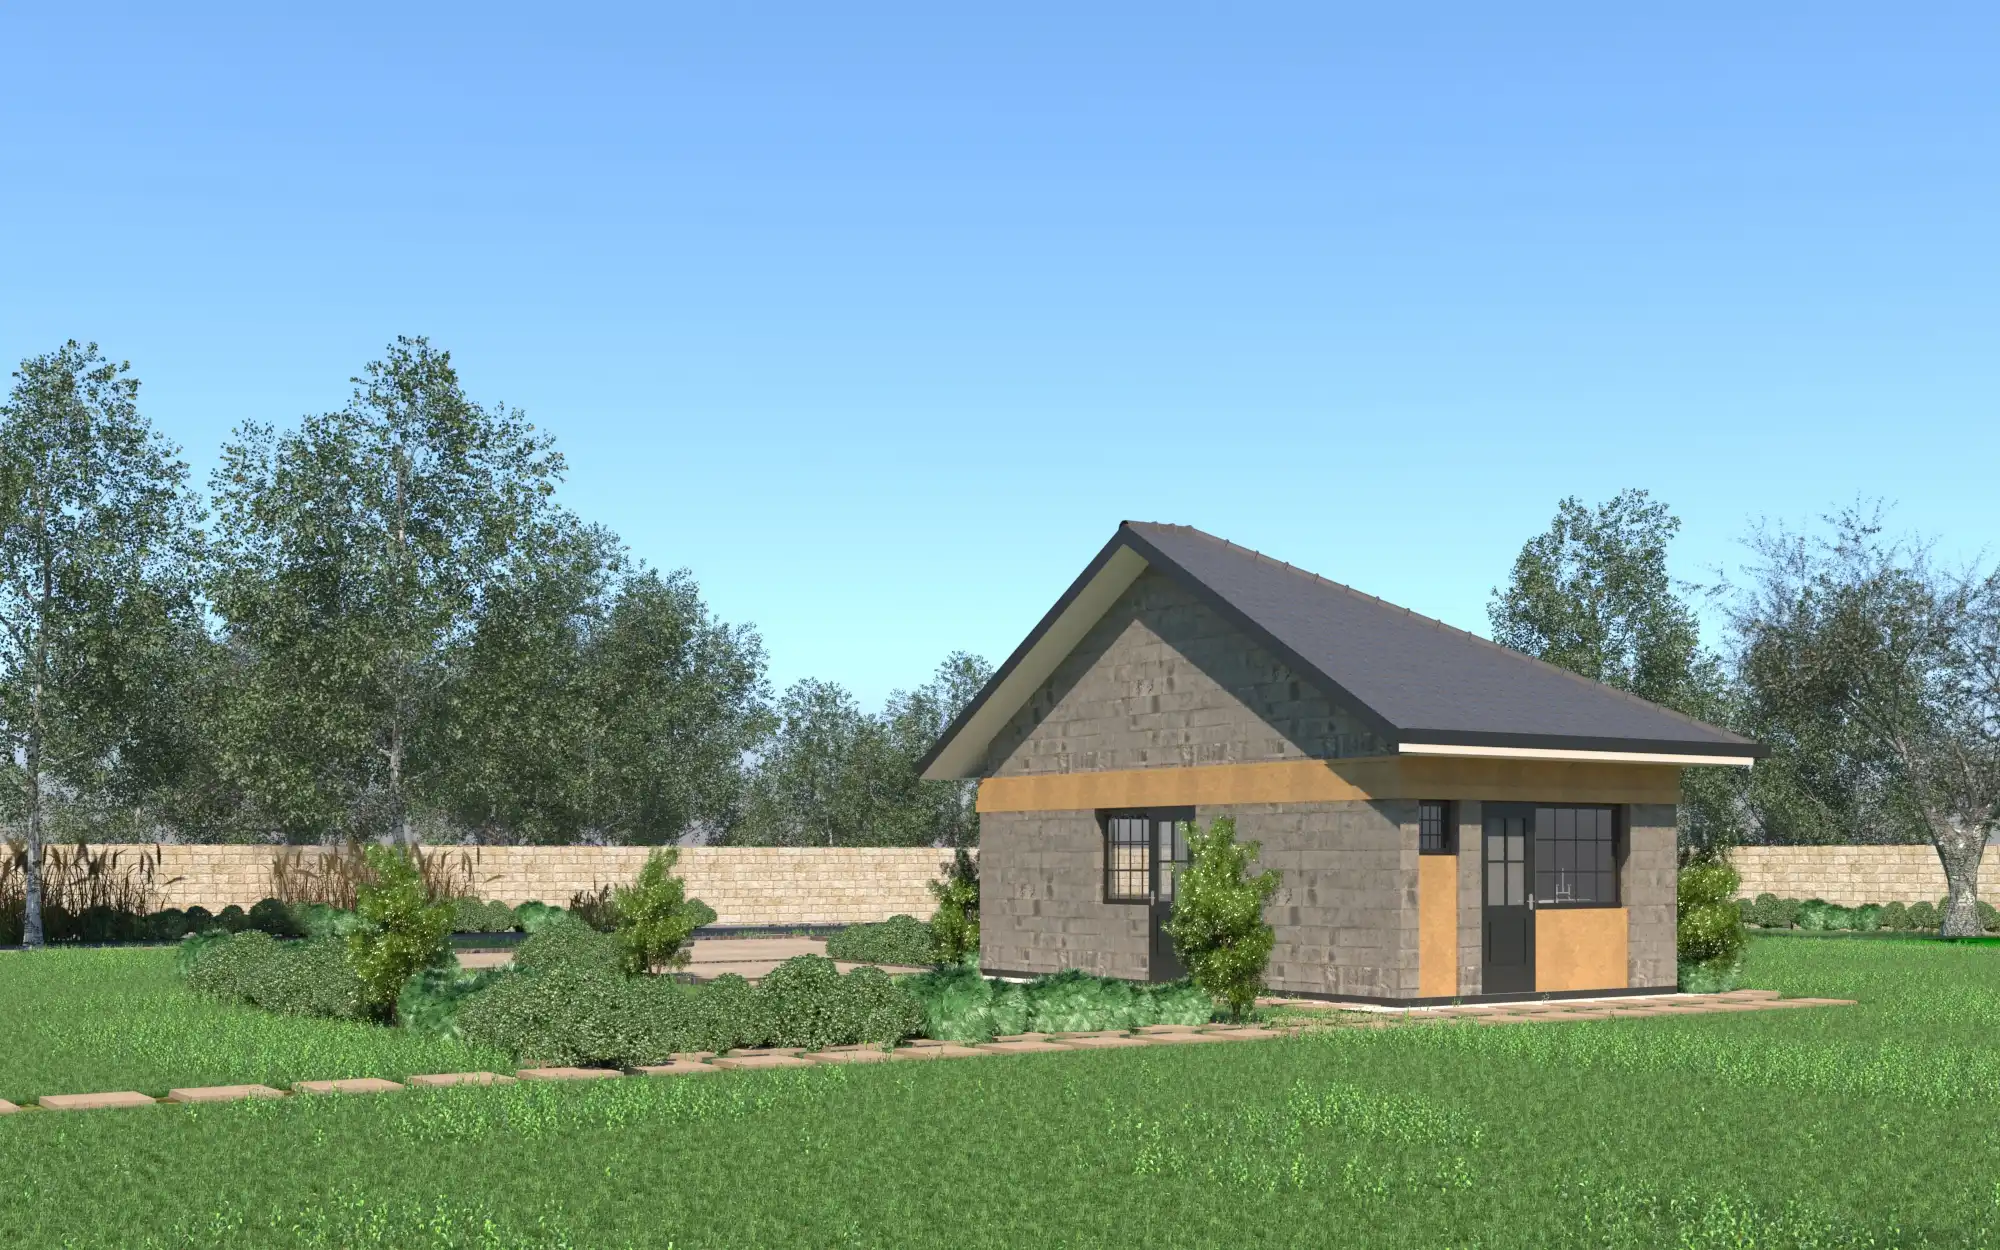 3 Bedroom Bungalow - ID 31101 - Phase 1 - Rear from Inuua Tujenge house plans with 3 bedrooms and 2 bathrooms. ( jengapolepole )